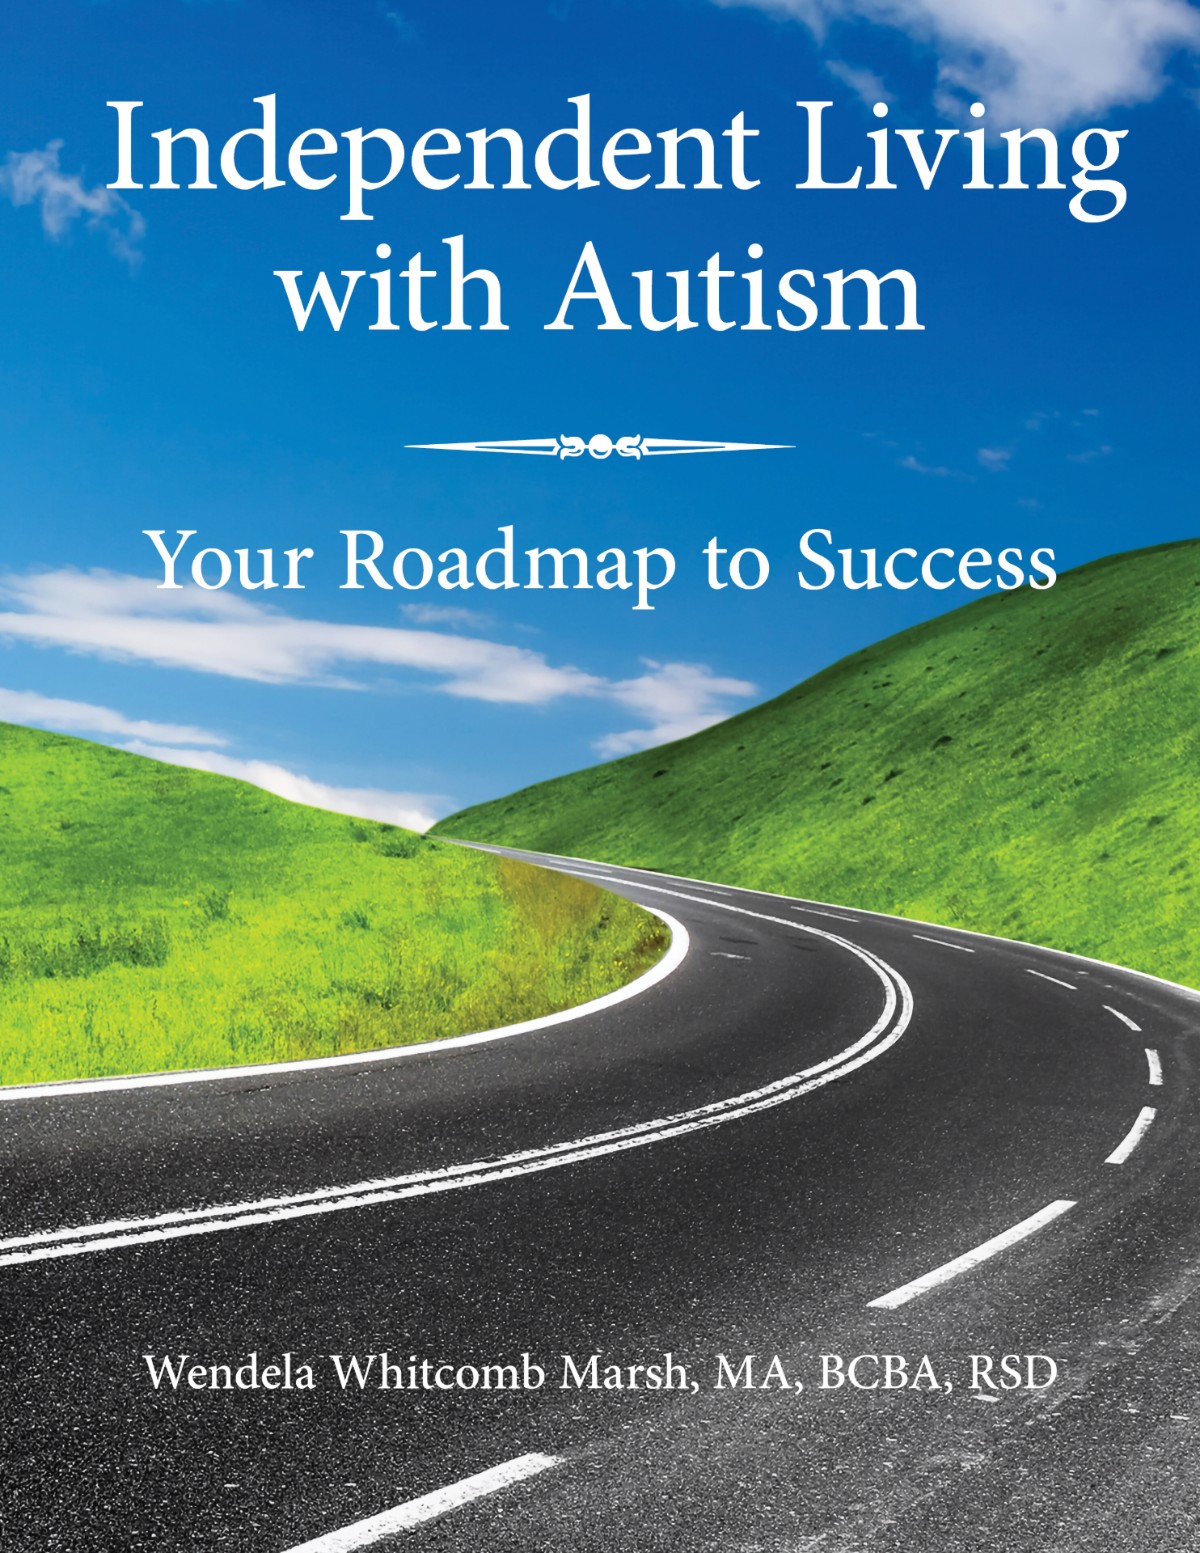 "Independent Living with Autism" - Now Available from Future Horizons